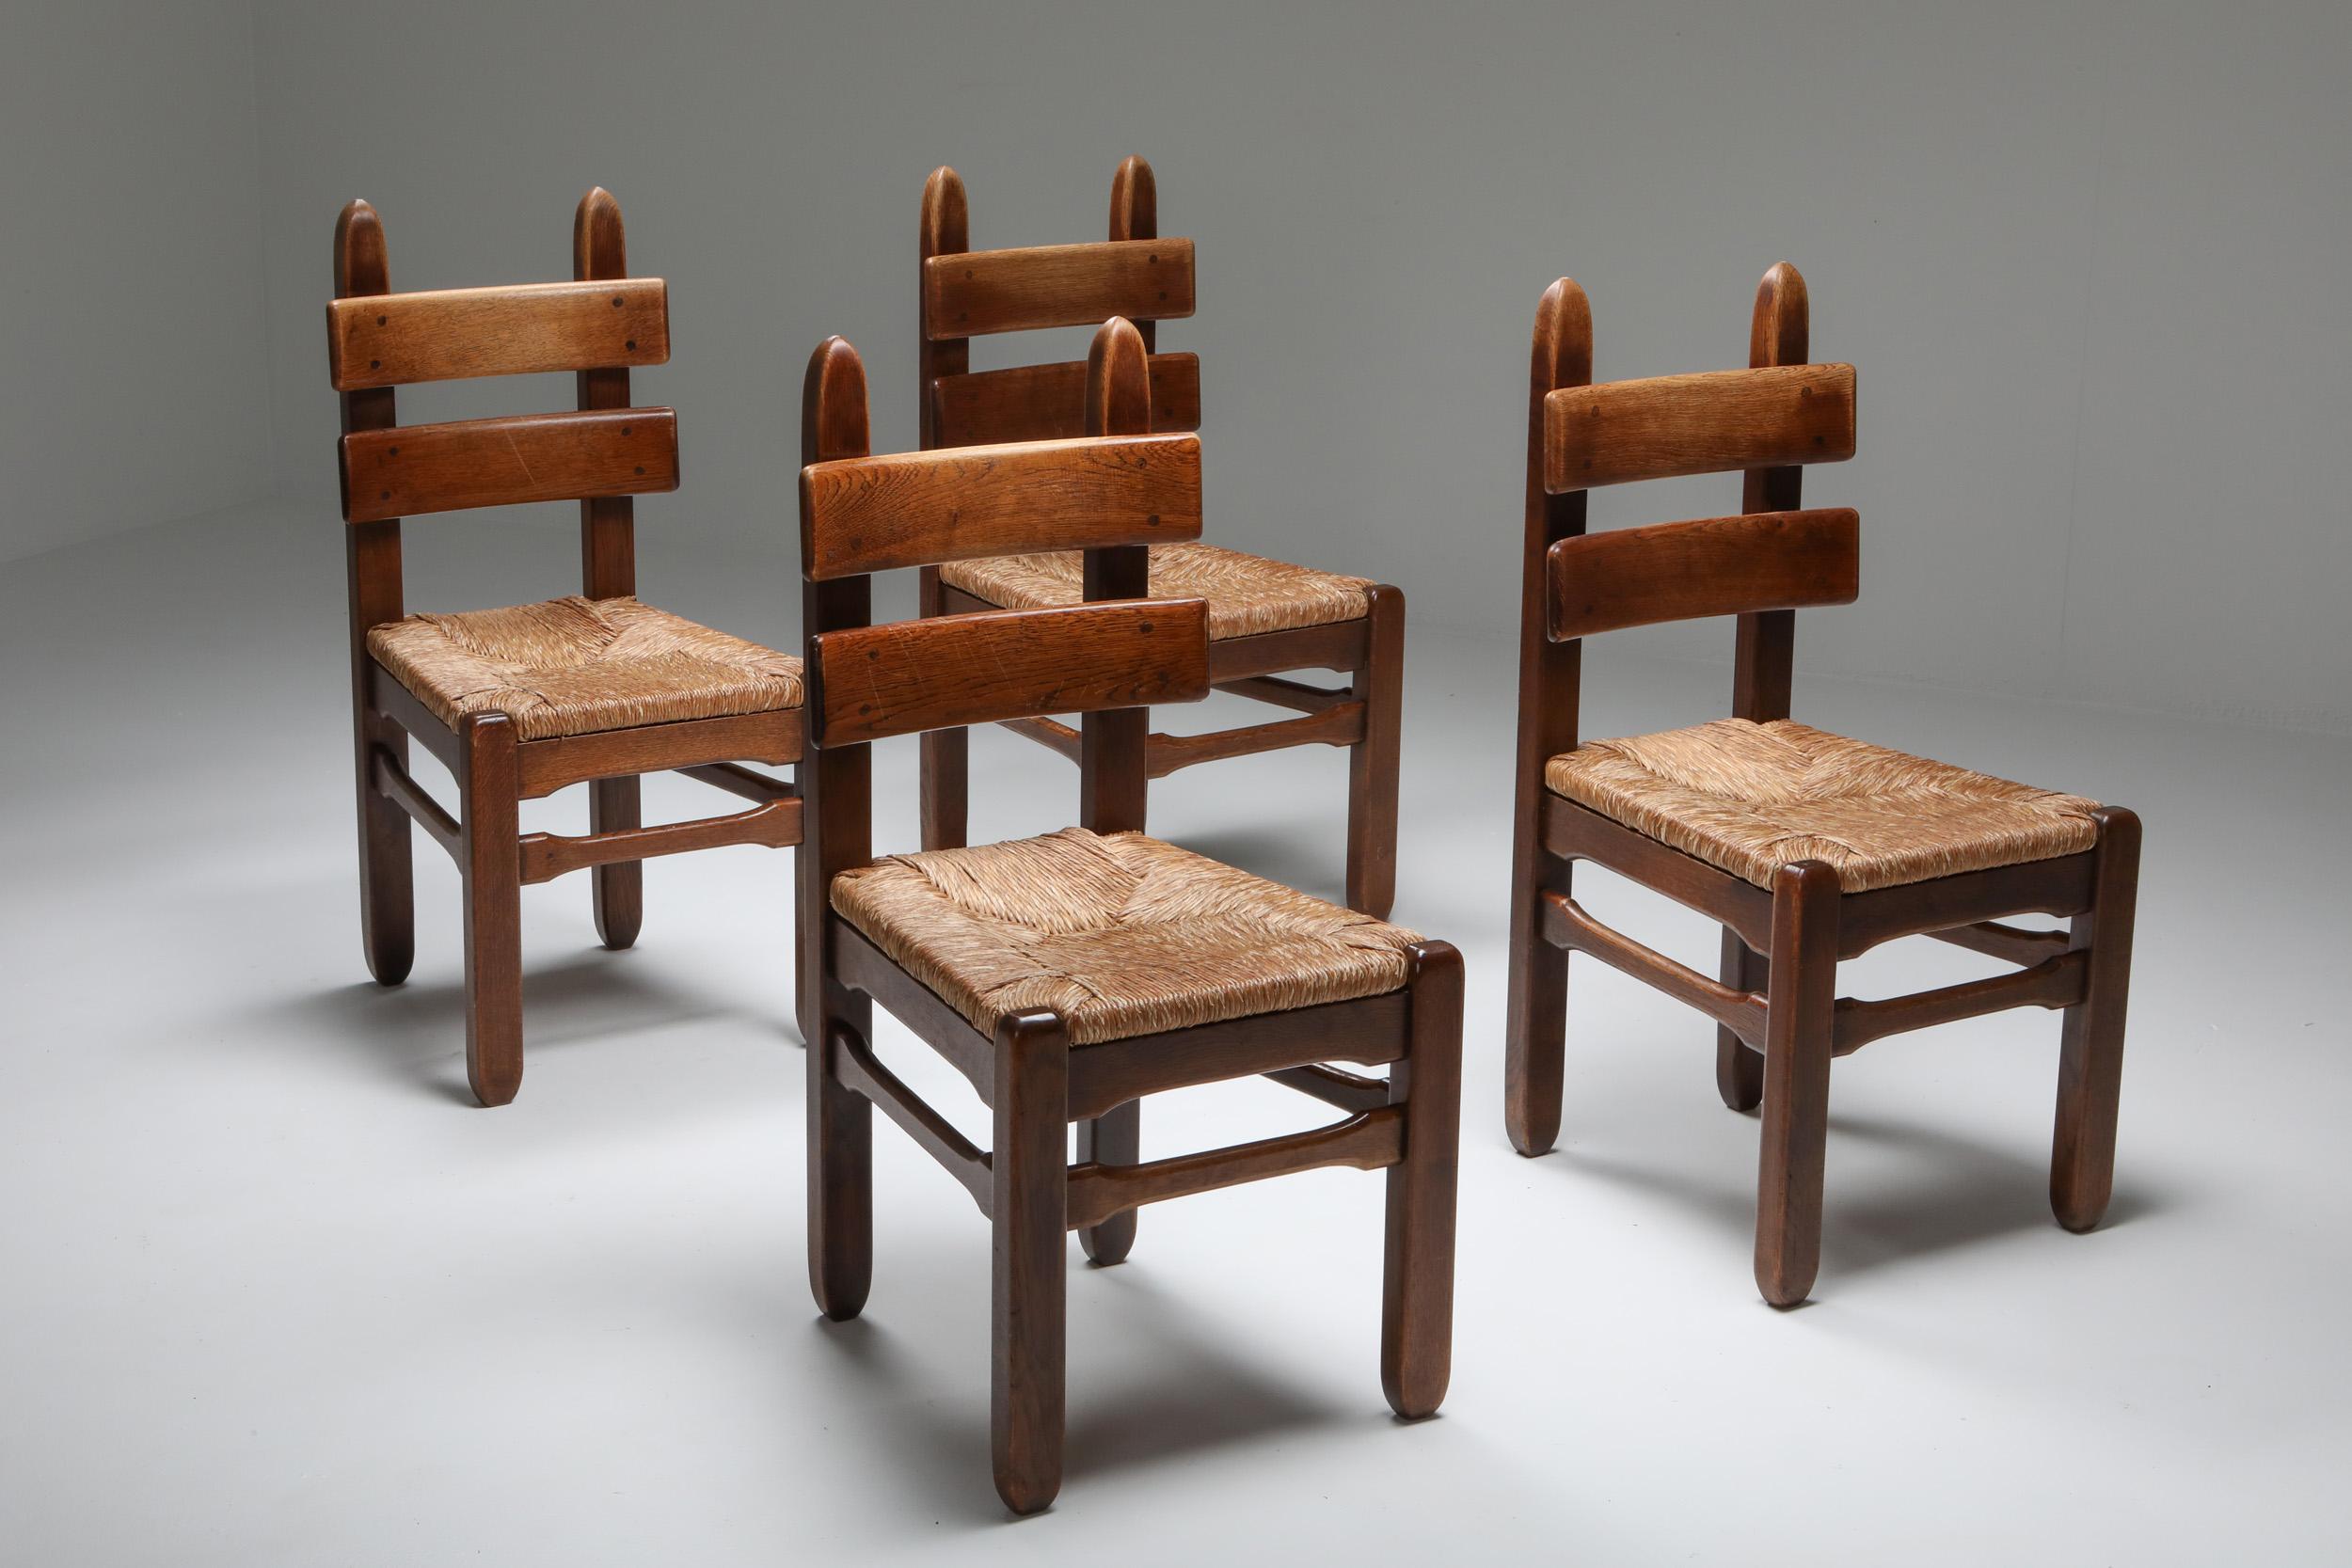 Solid oak chairs, set of four, original cord seating.

Rustic modern dining chairs
their slightly bigger size make them like small thrones
Very heavy and sturdy pieces with super gorgeous patina and character.
  